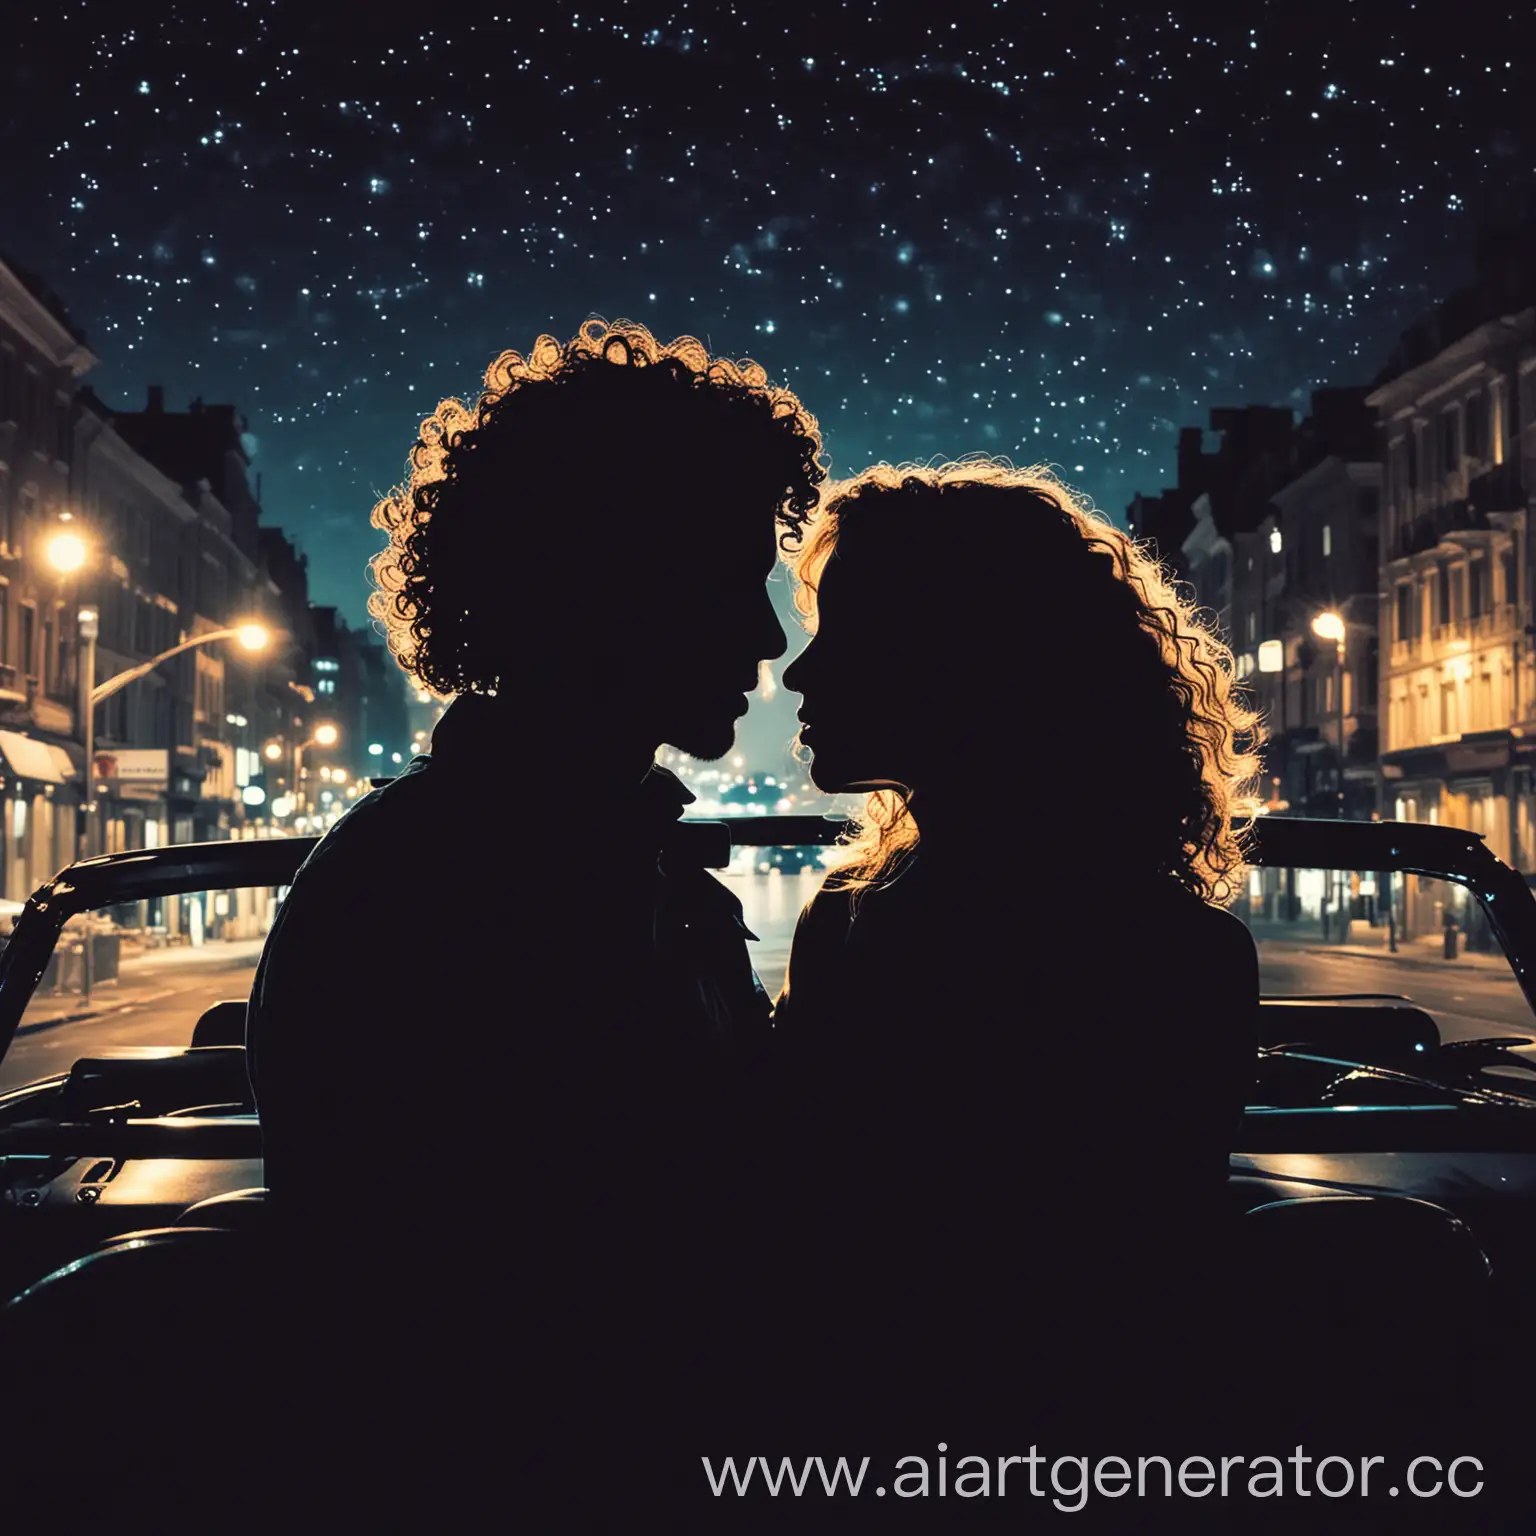 Romantic-Silhouette-of-Couple-in-Car-at-Night-with-City-Lights